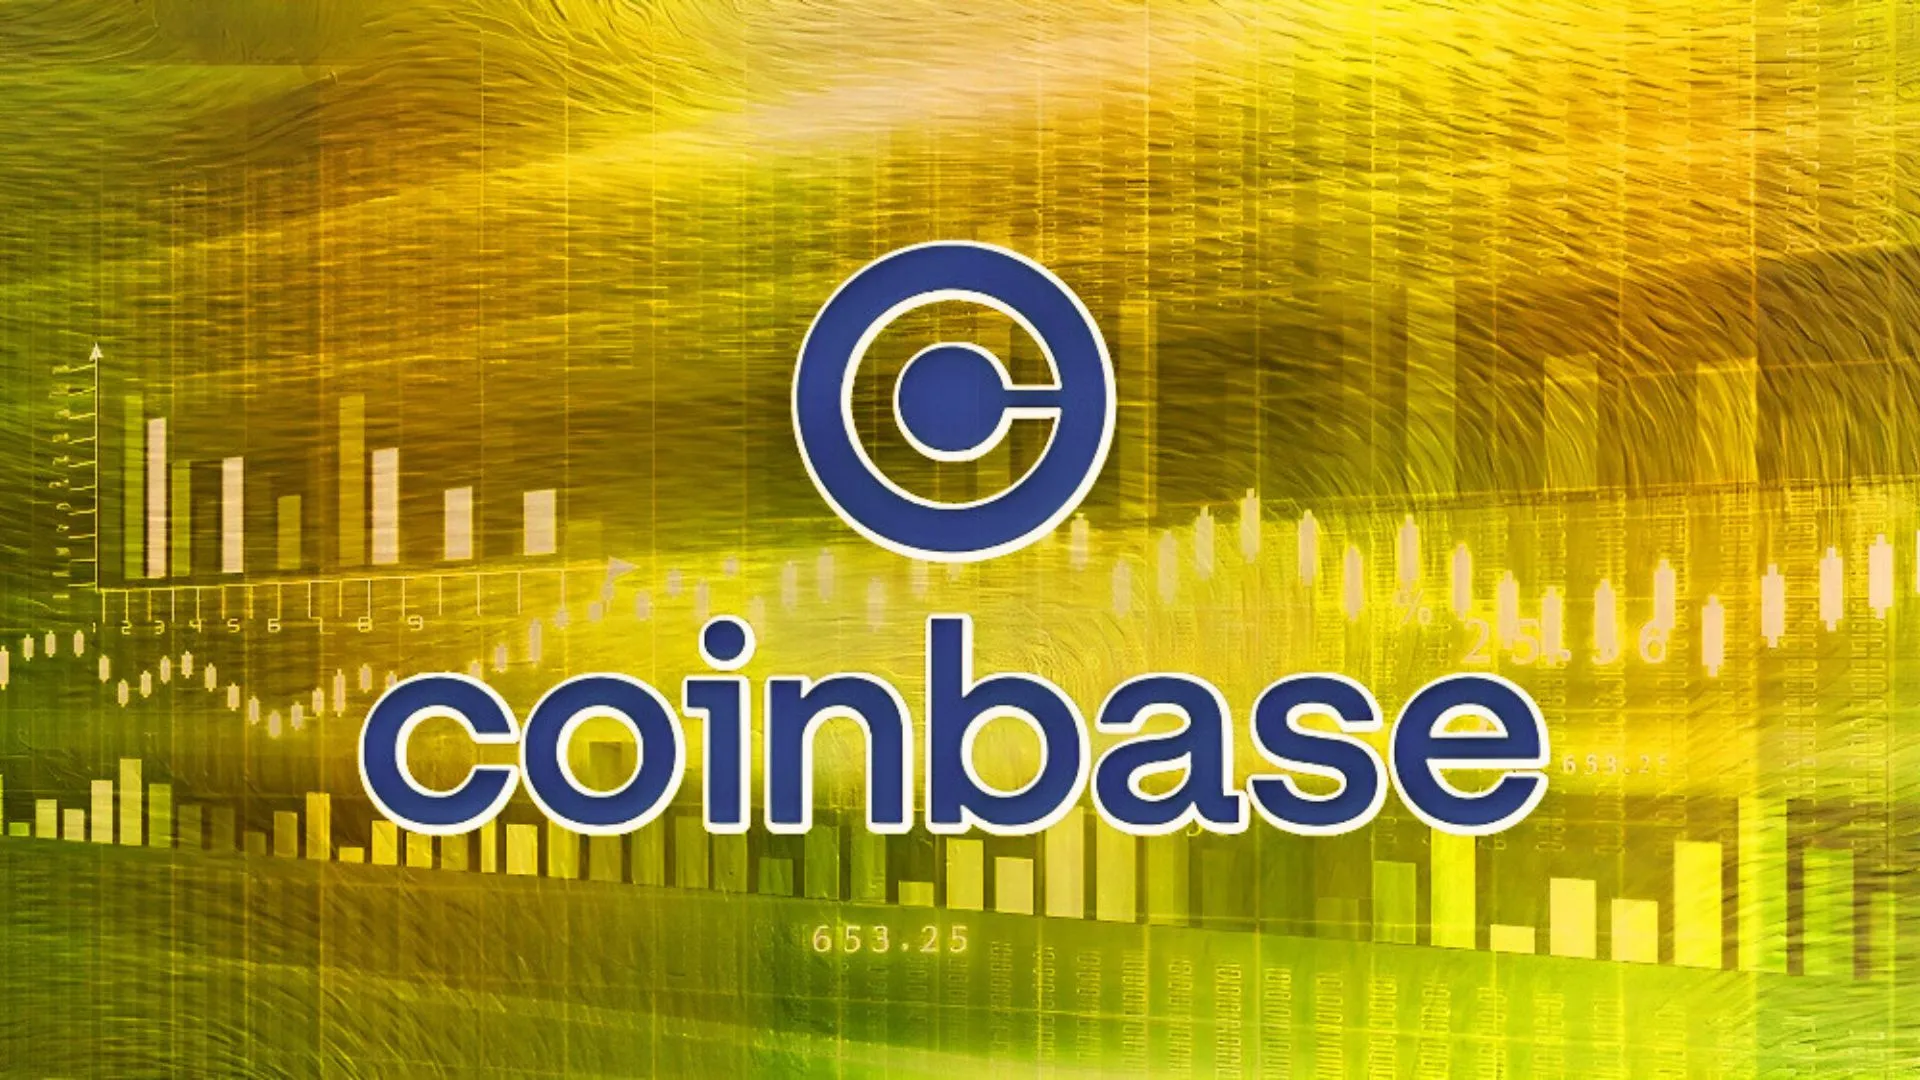 Coinbase Global Inc.: Will the COIN Stock Price Recover $100?